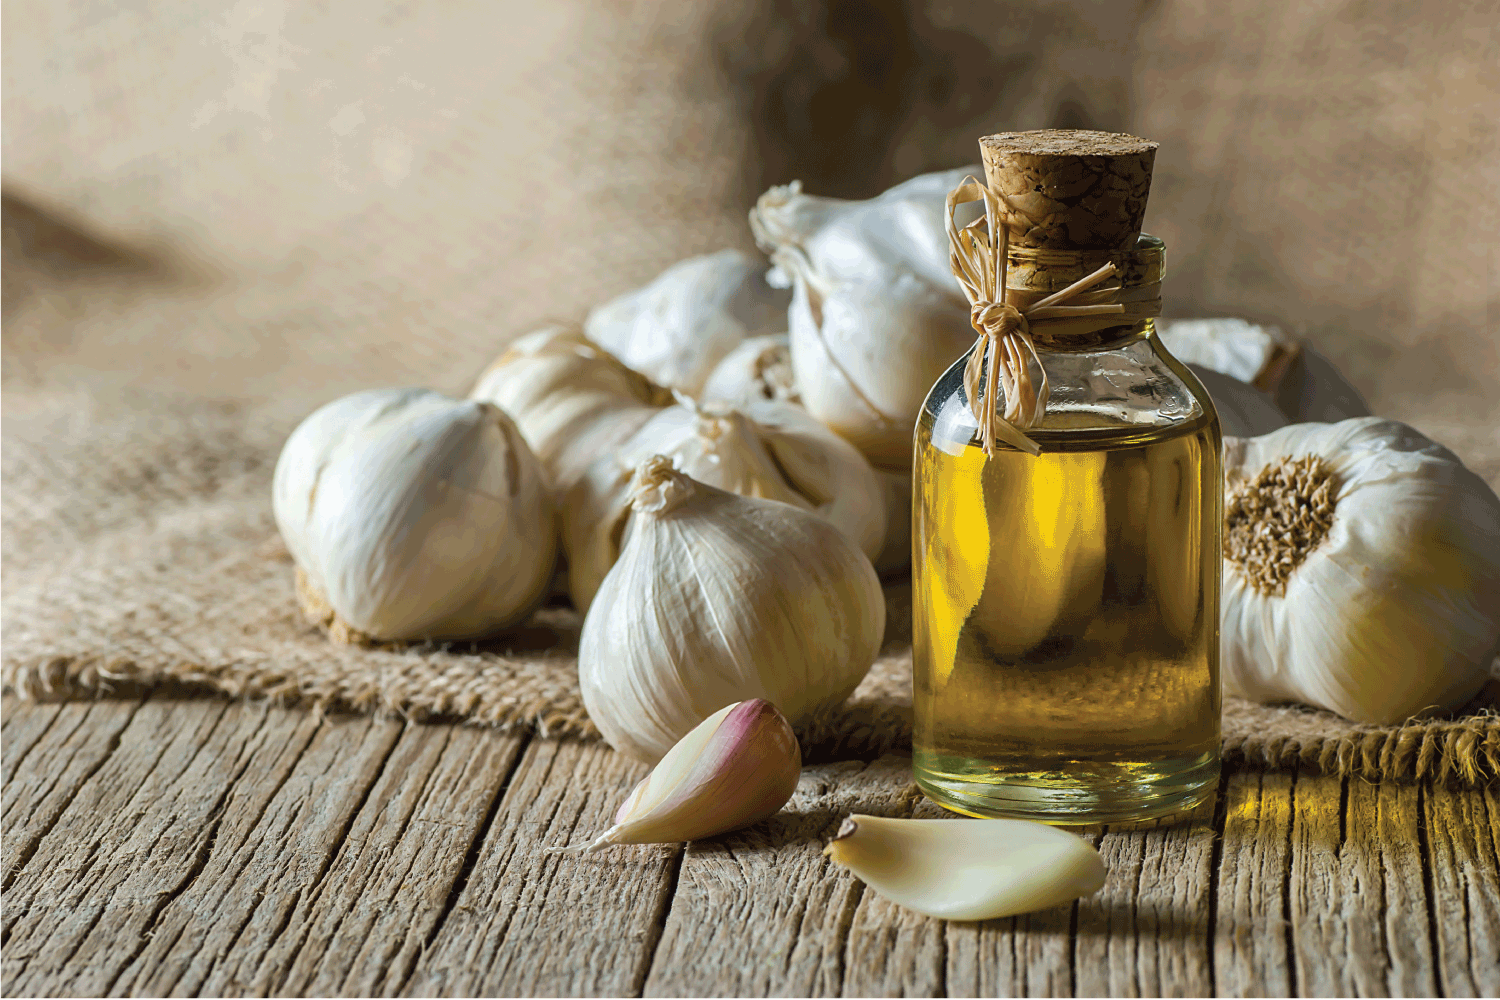 Ripe and raw garlic and garlic oil in glass of bottle on wooden table with burlap sack, alternative medicine, organic cleaner